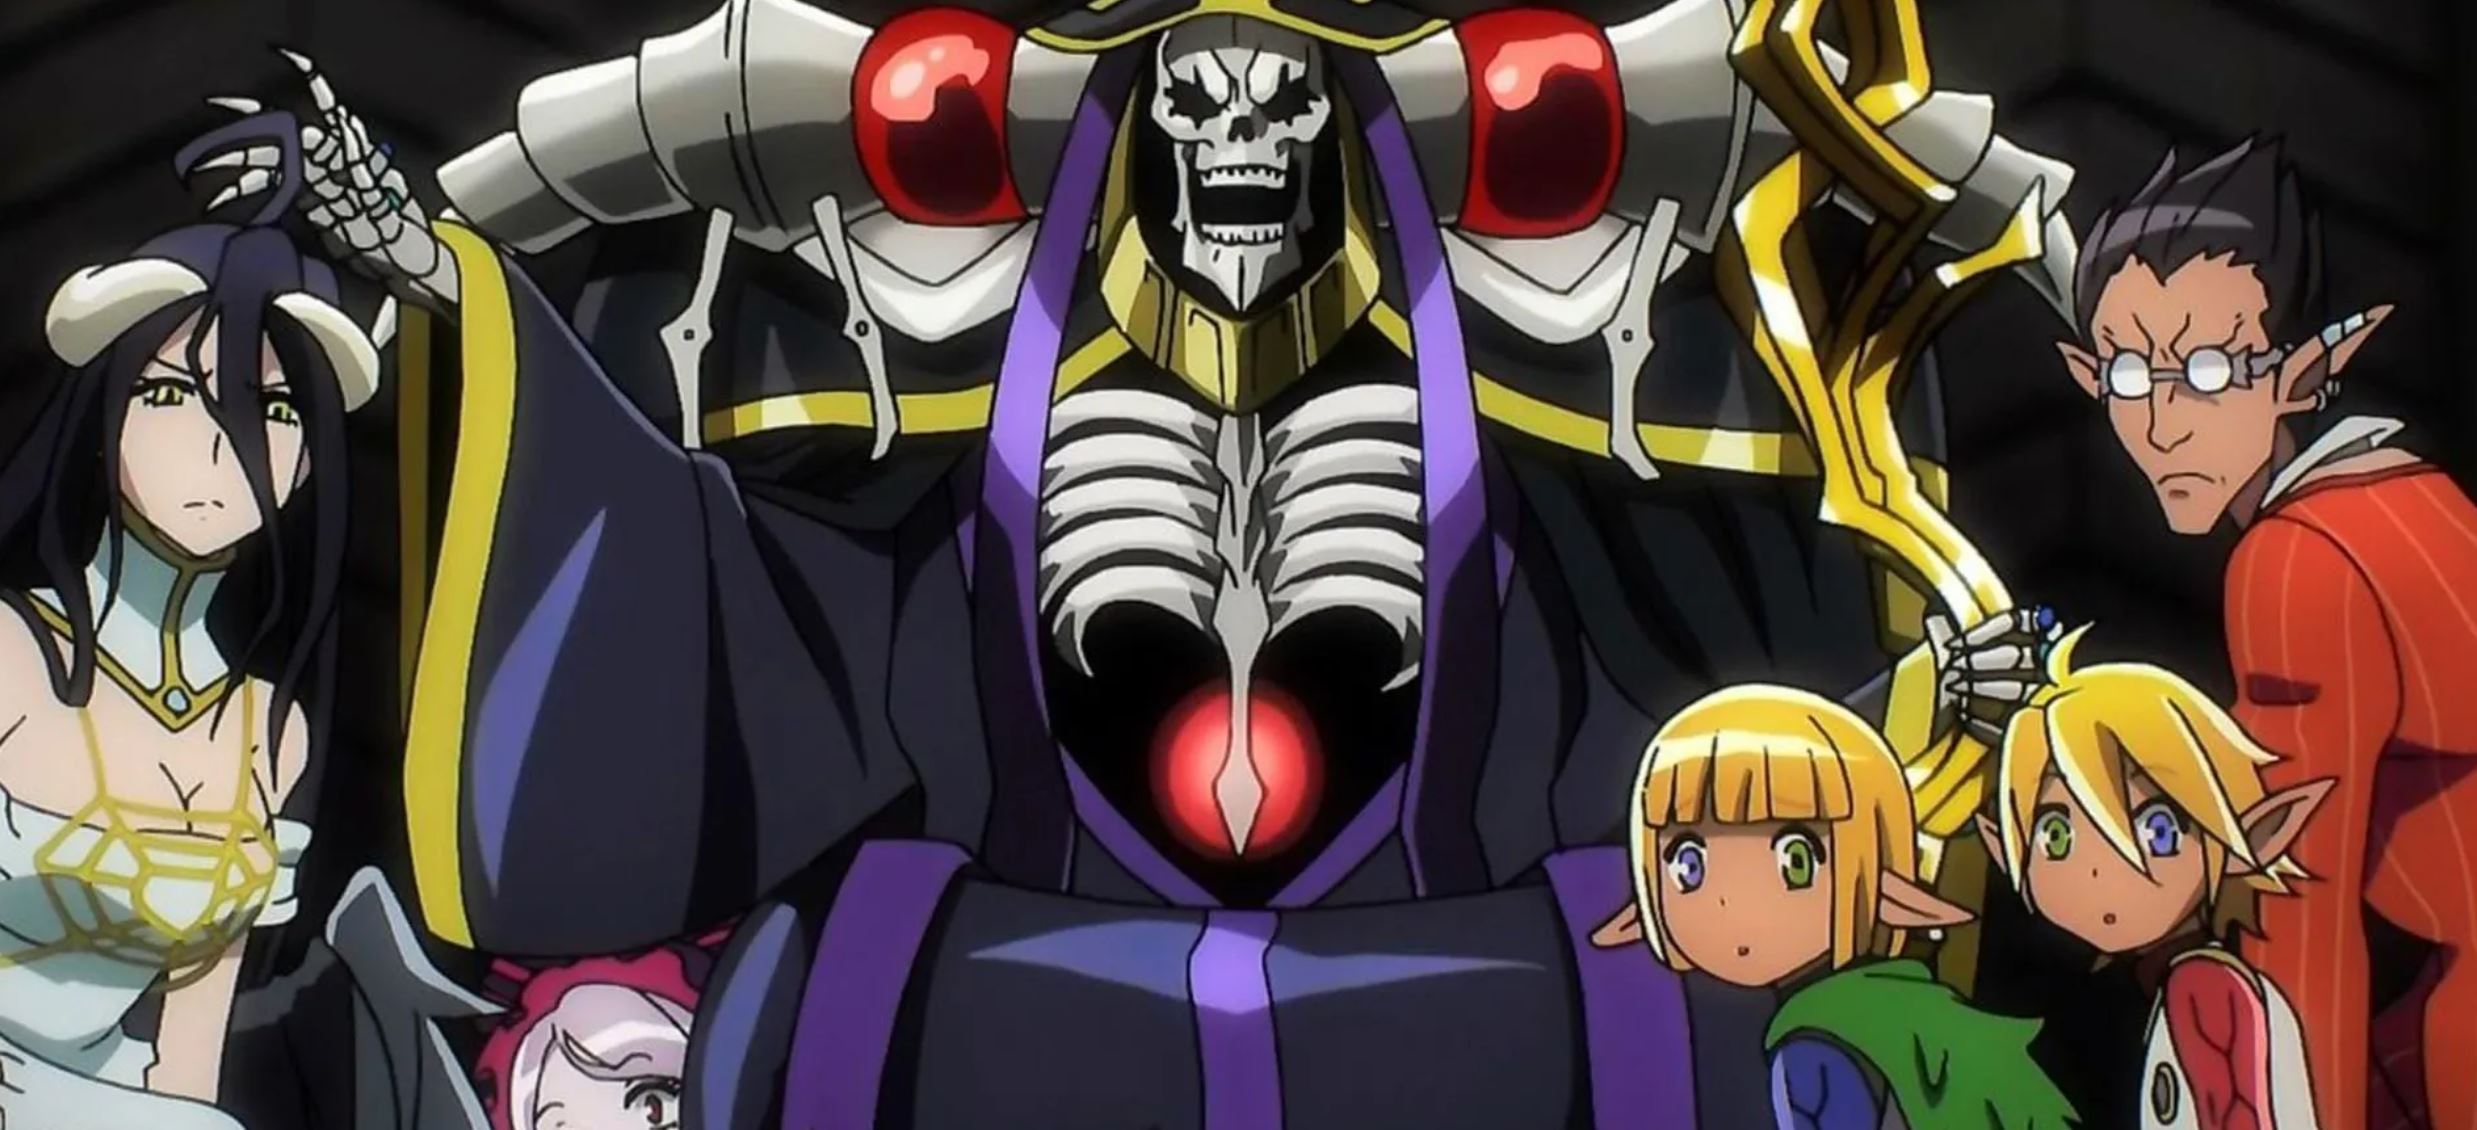 Is Overlord On Netflix? How To Watch Overlord On Netflix